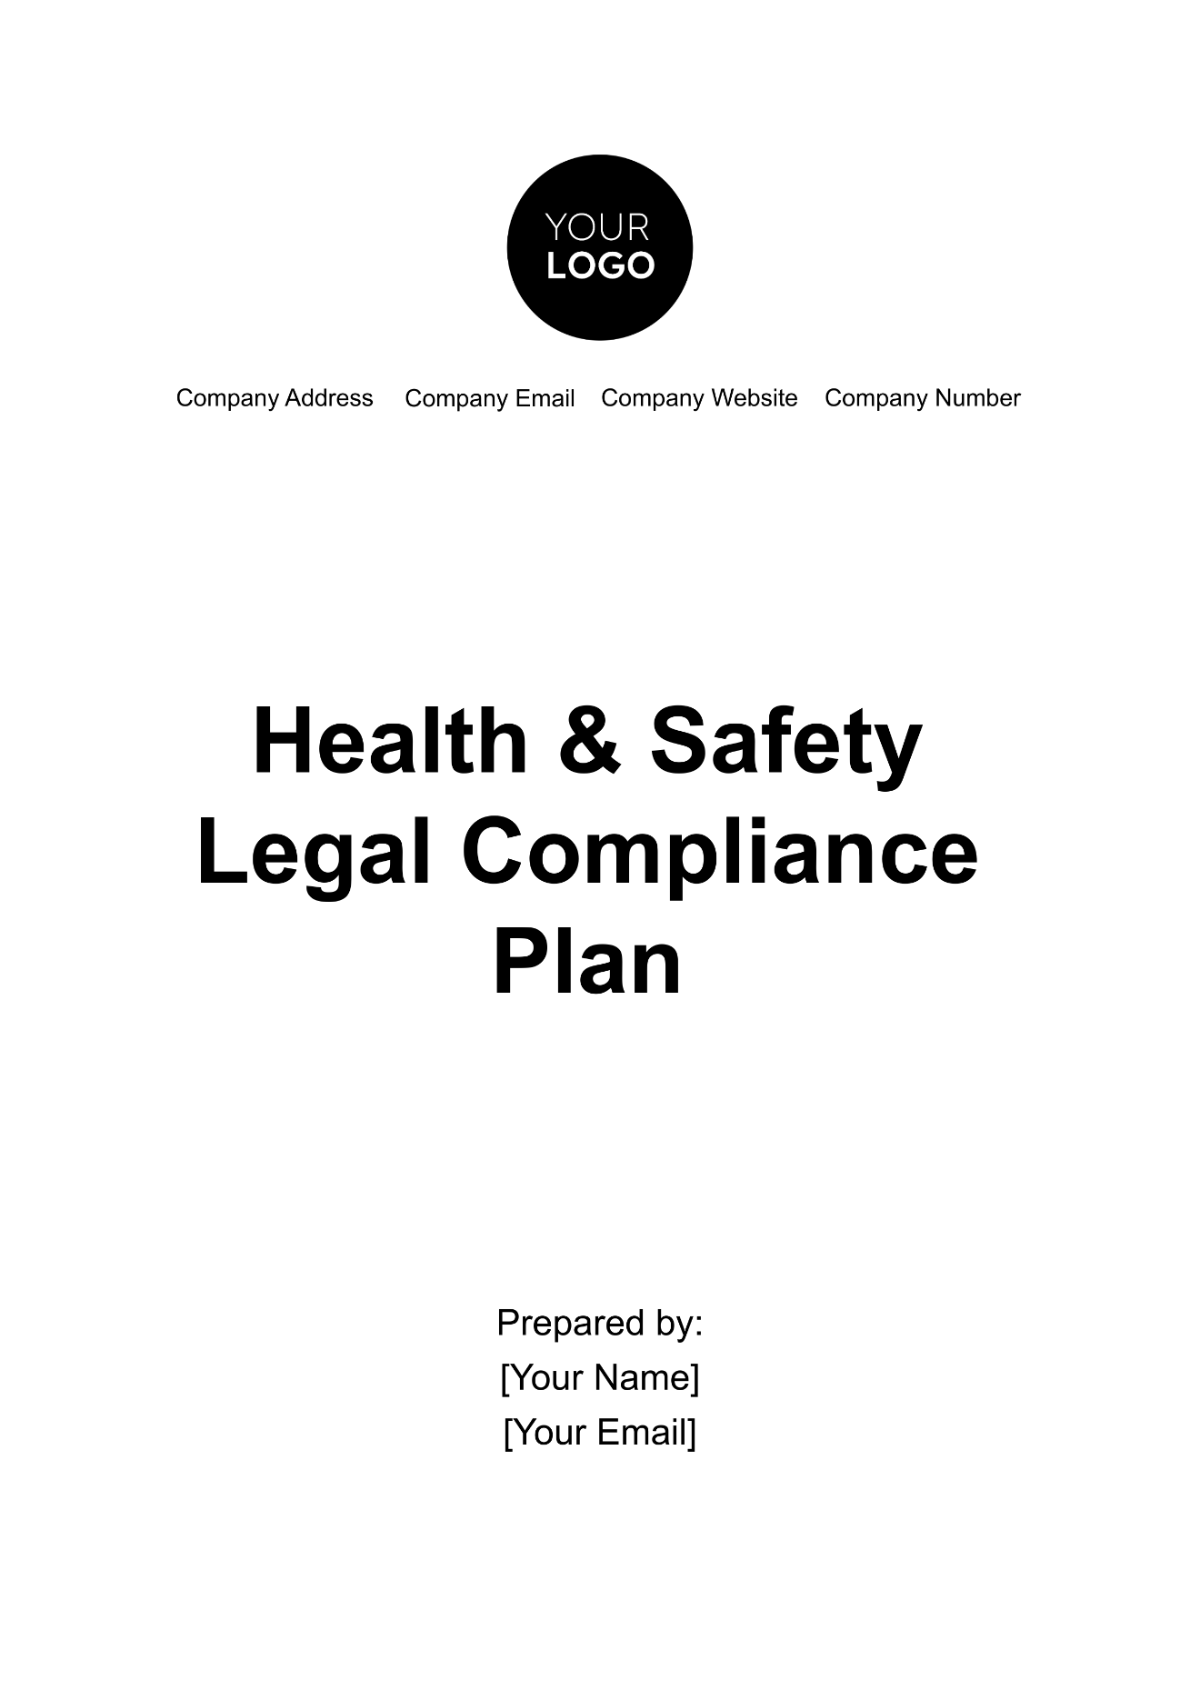 Free Health & Safety Legal Compliance Plan Document Template